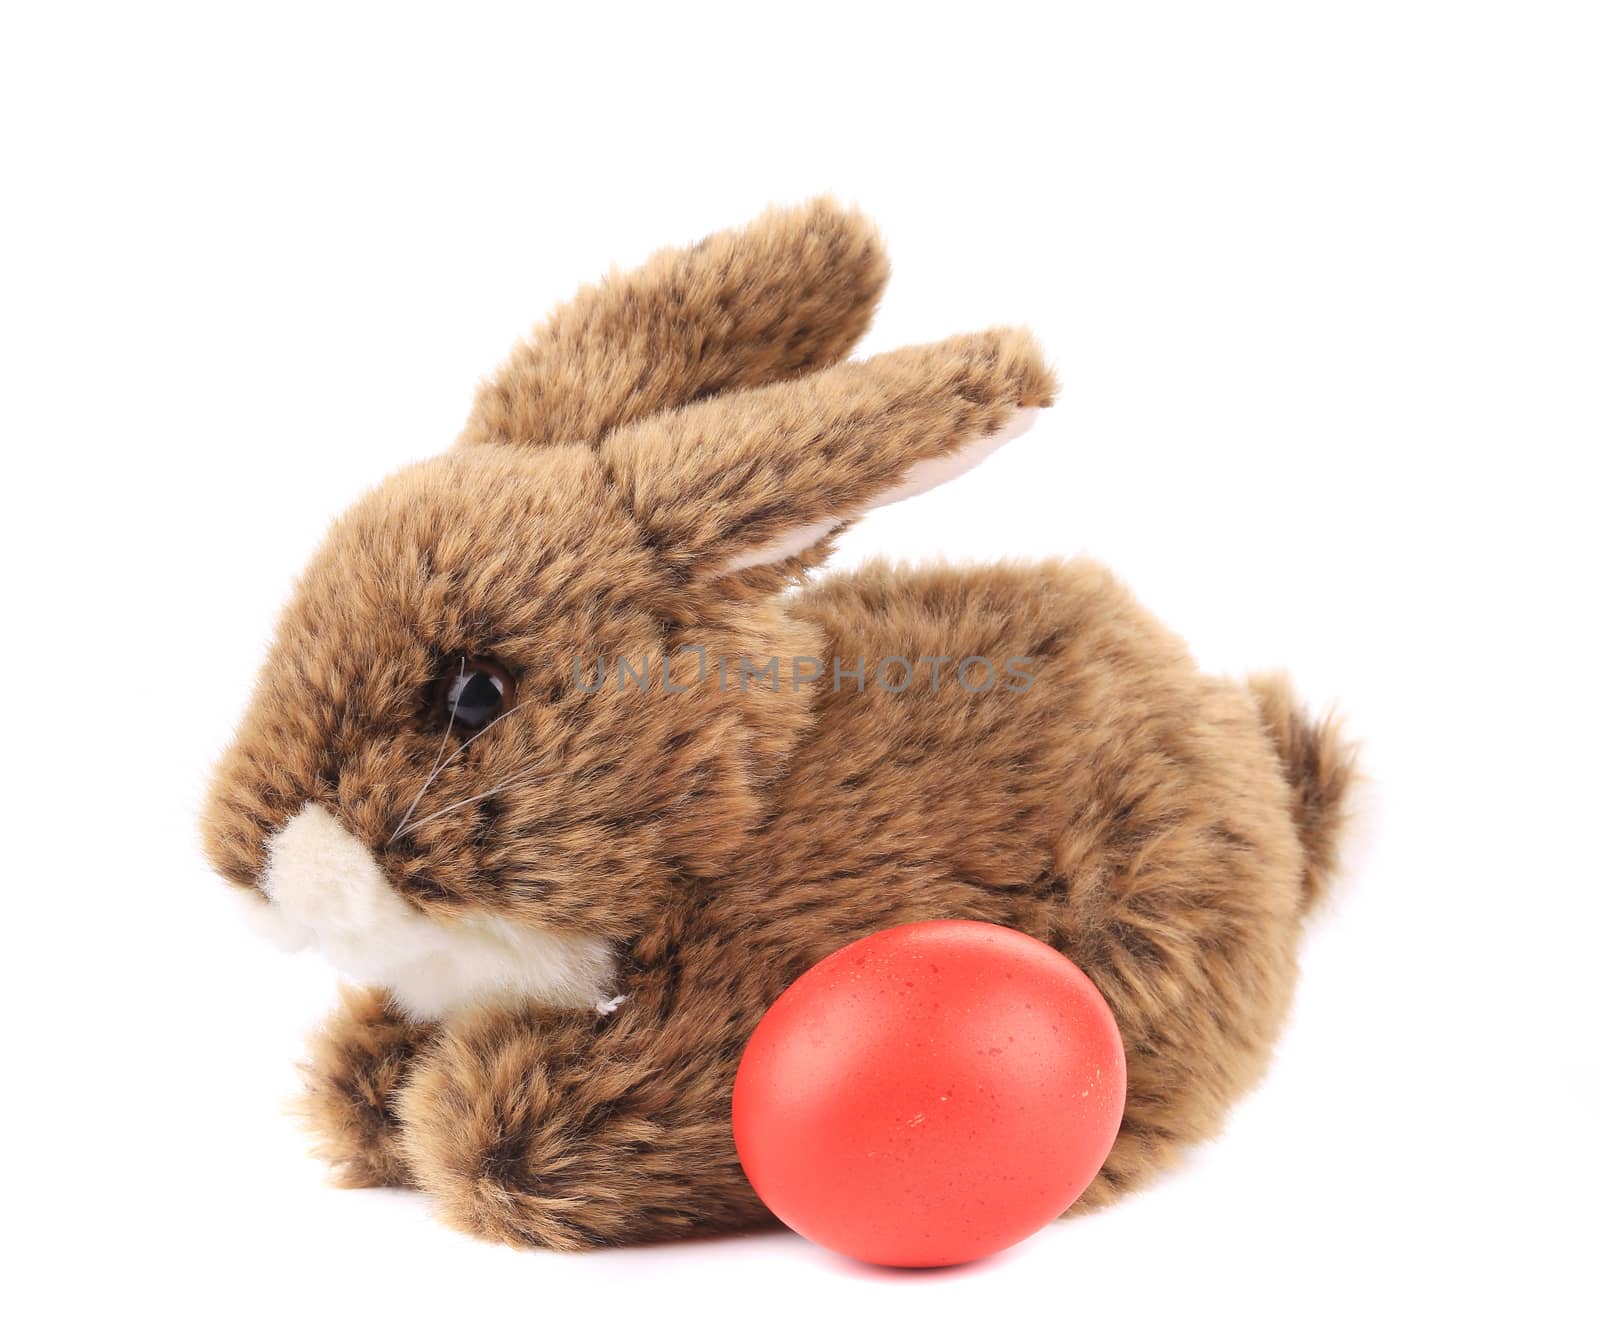 Easter rabbit and red egg. by indigolotos